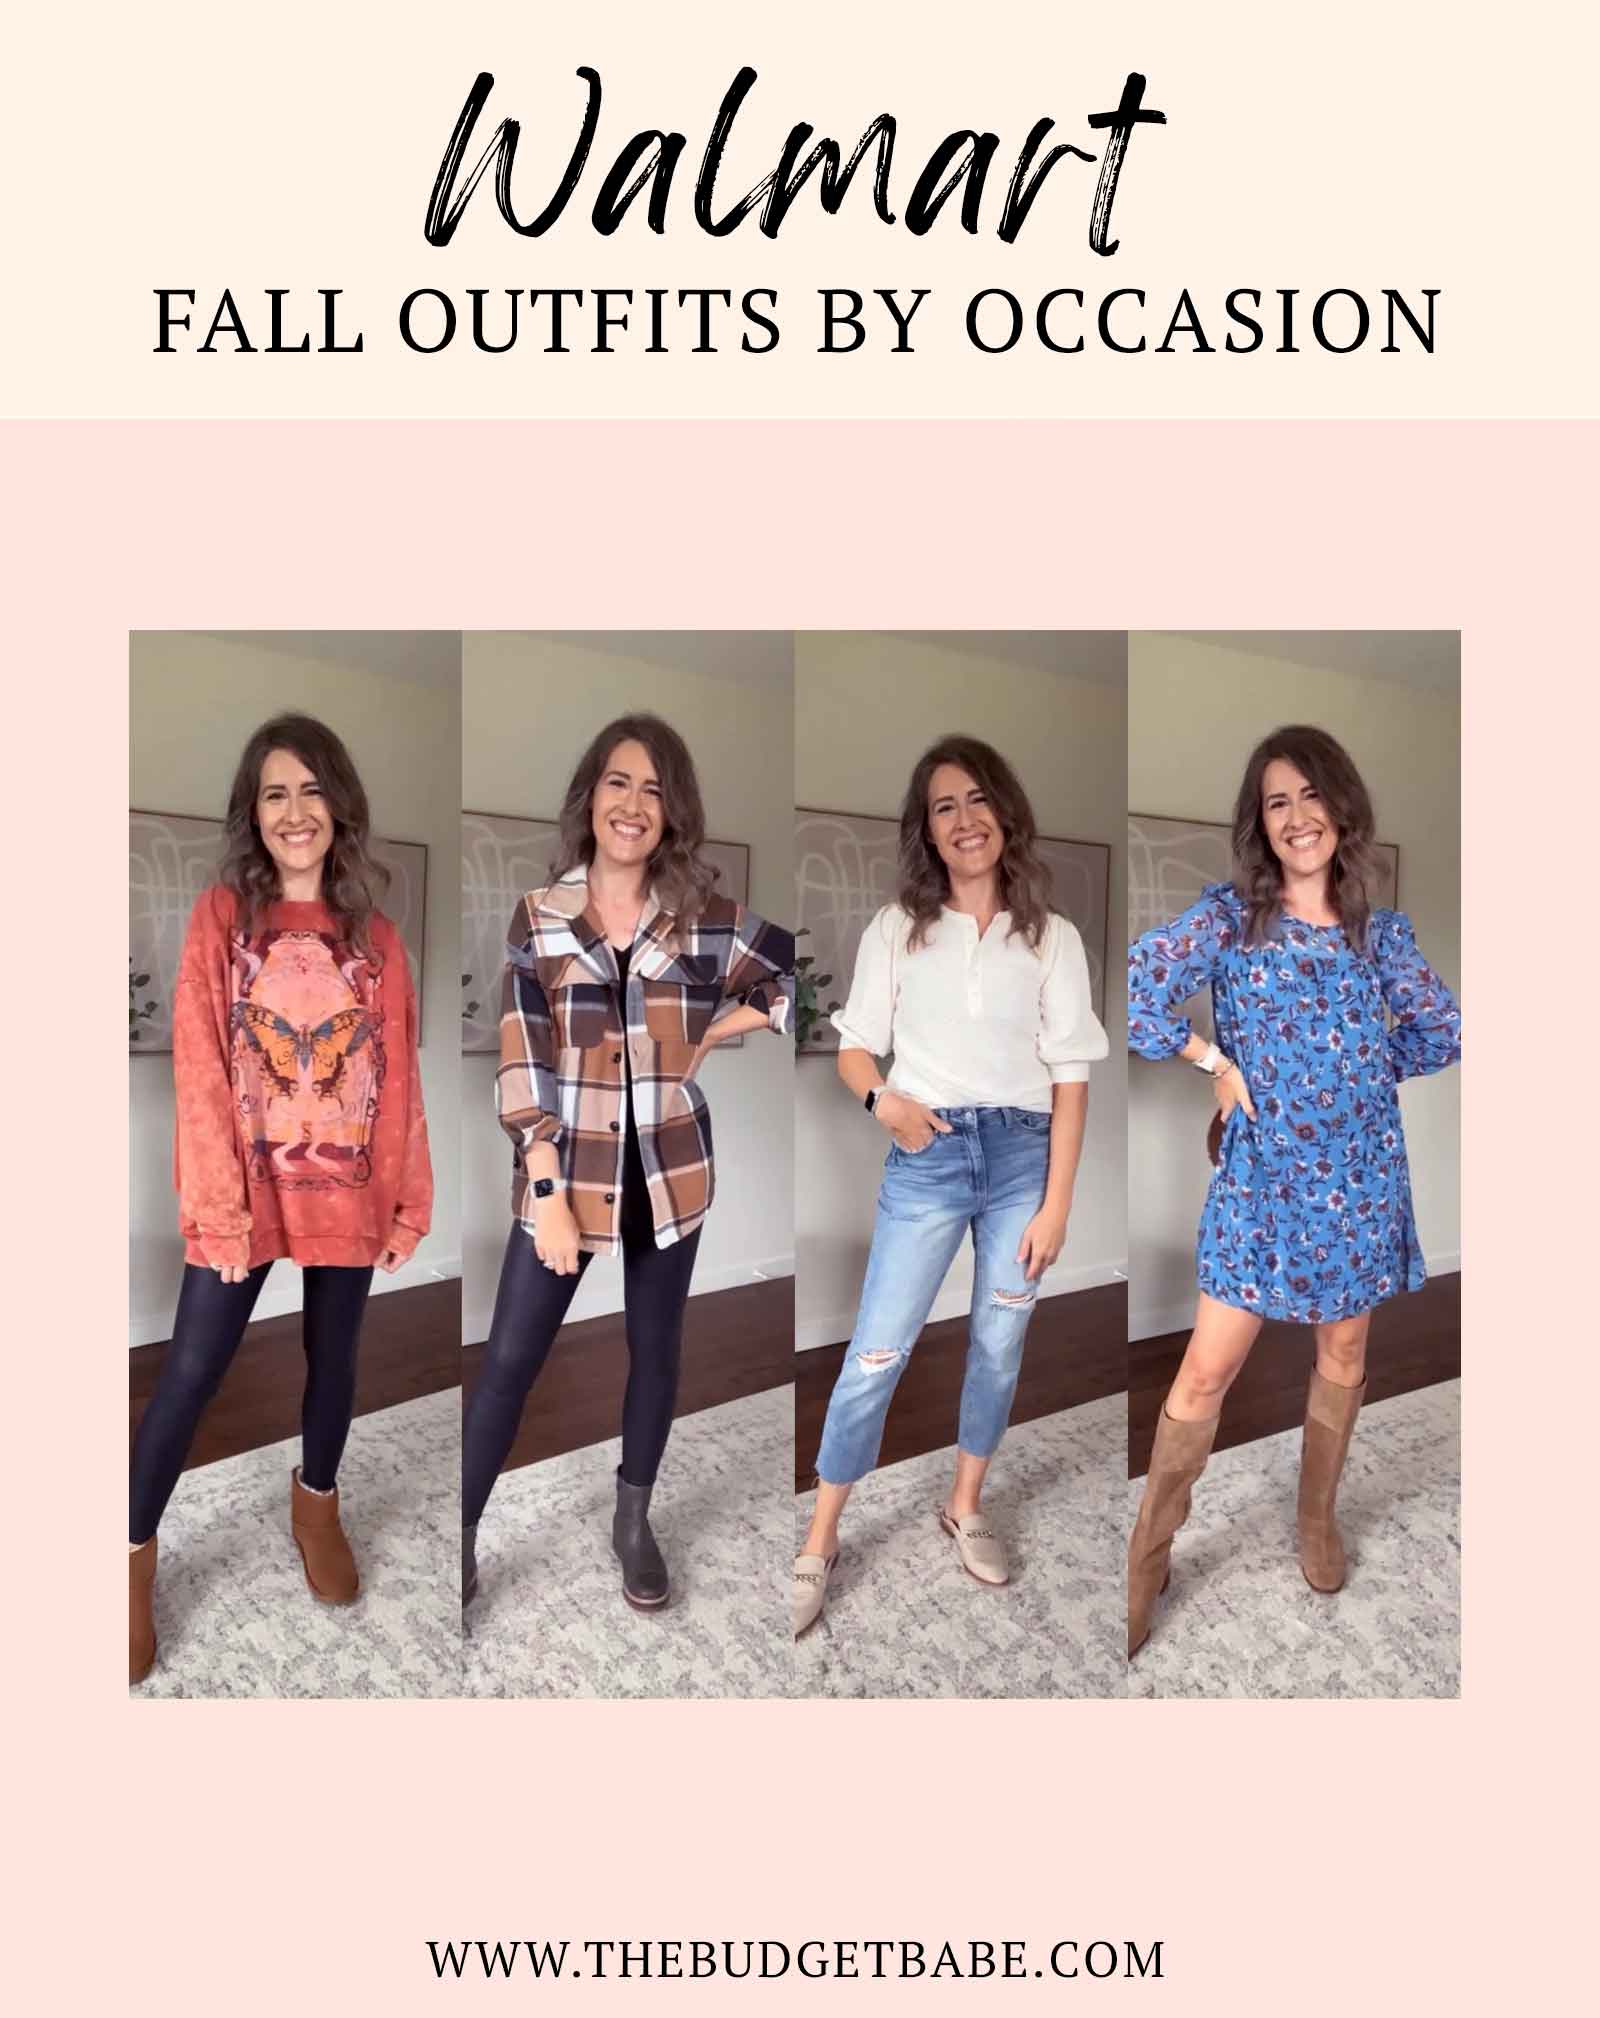 Fall clothes at Walmart (by occasion)